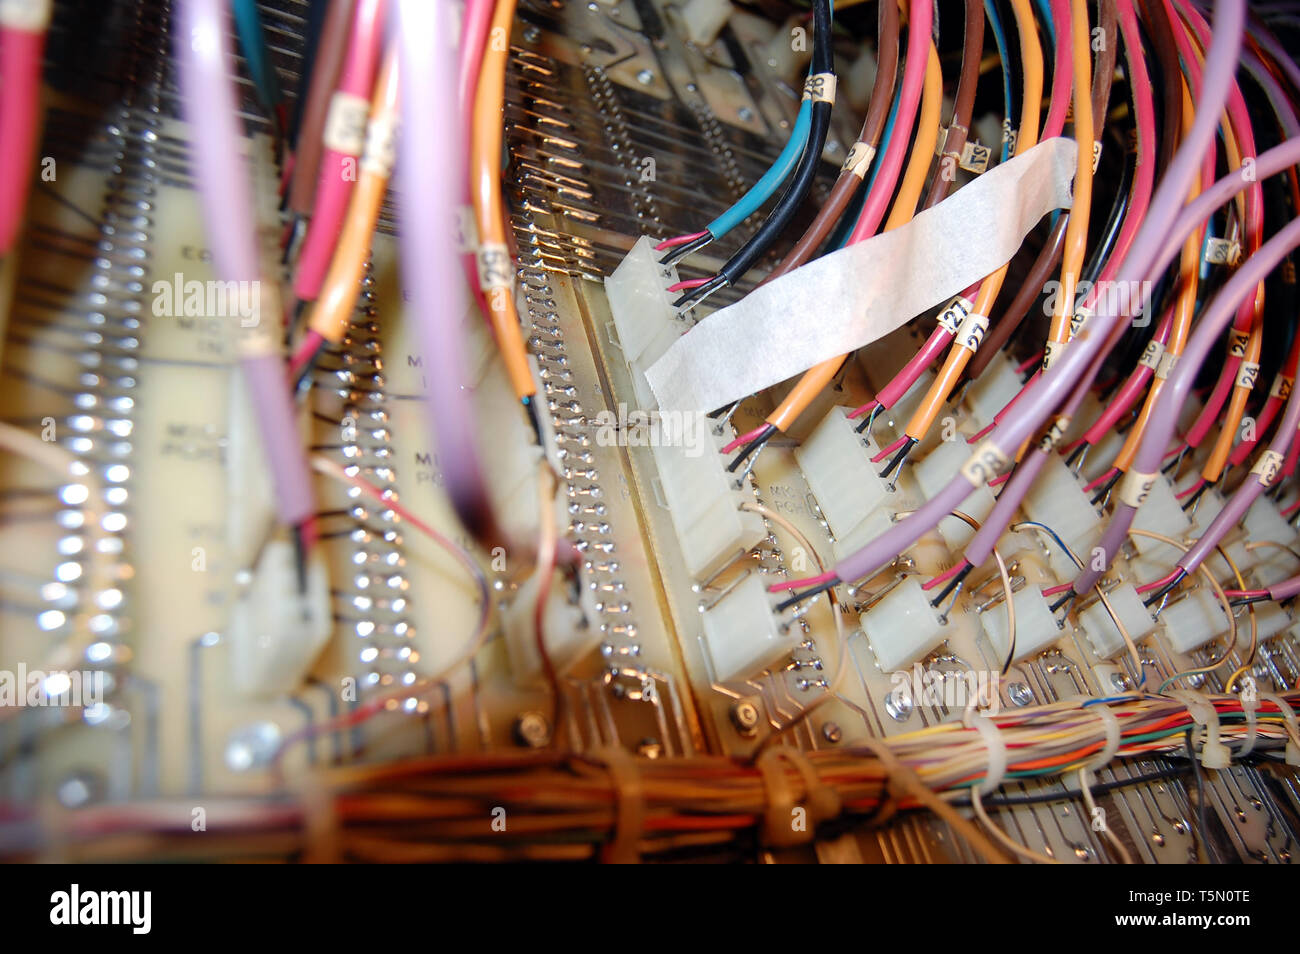 Underside of an analog audio console Stock Photo